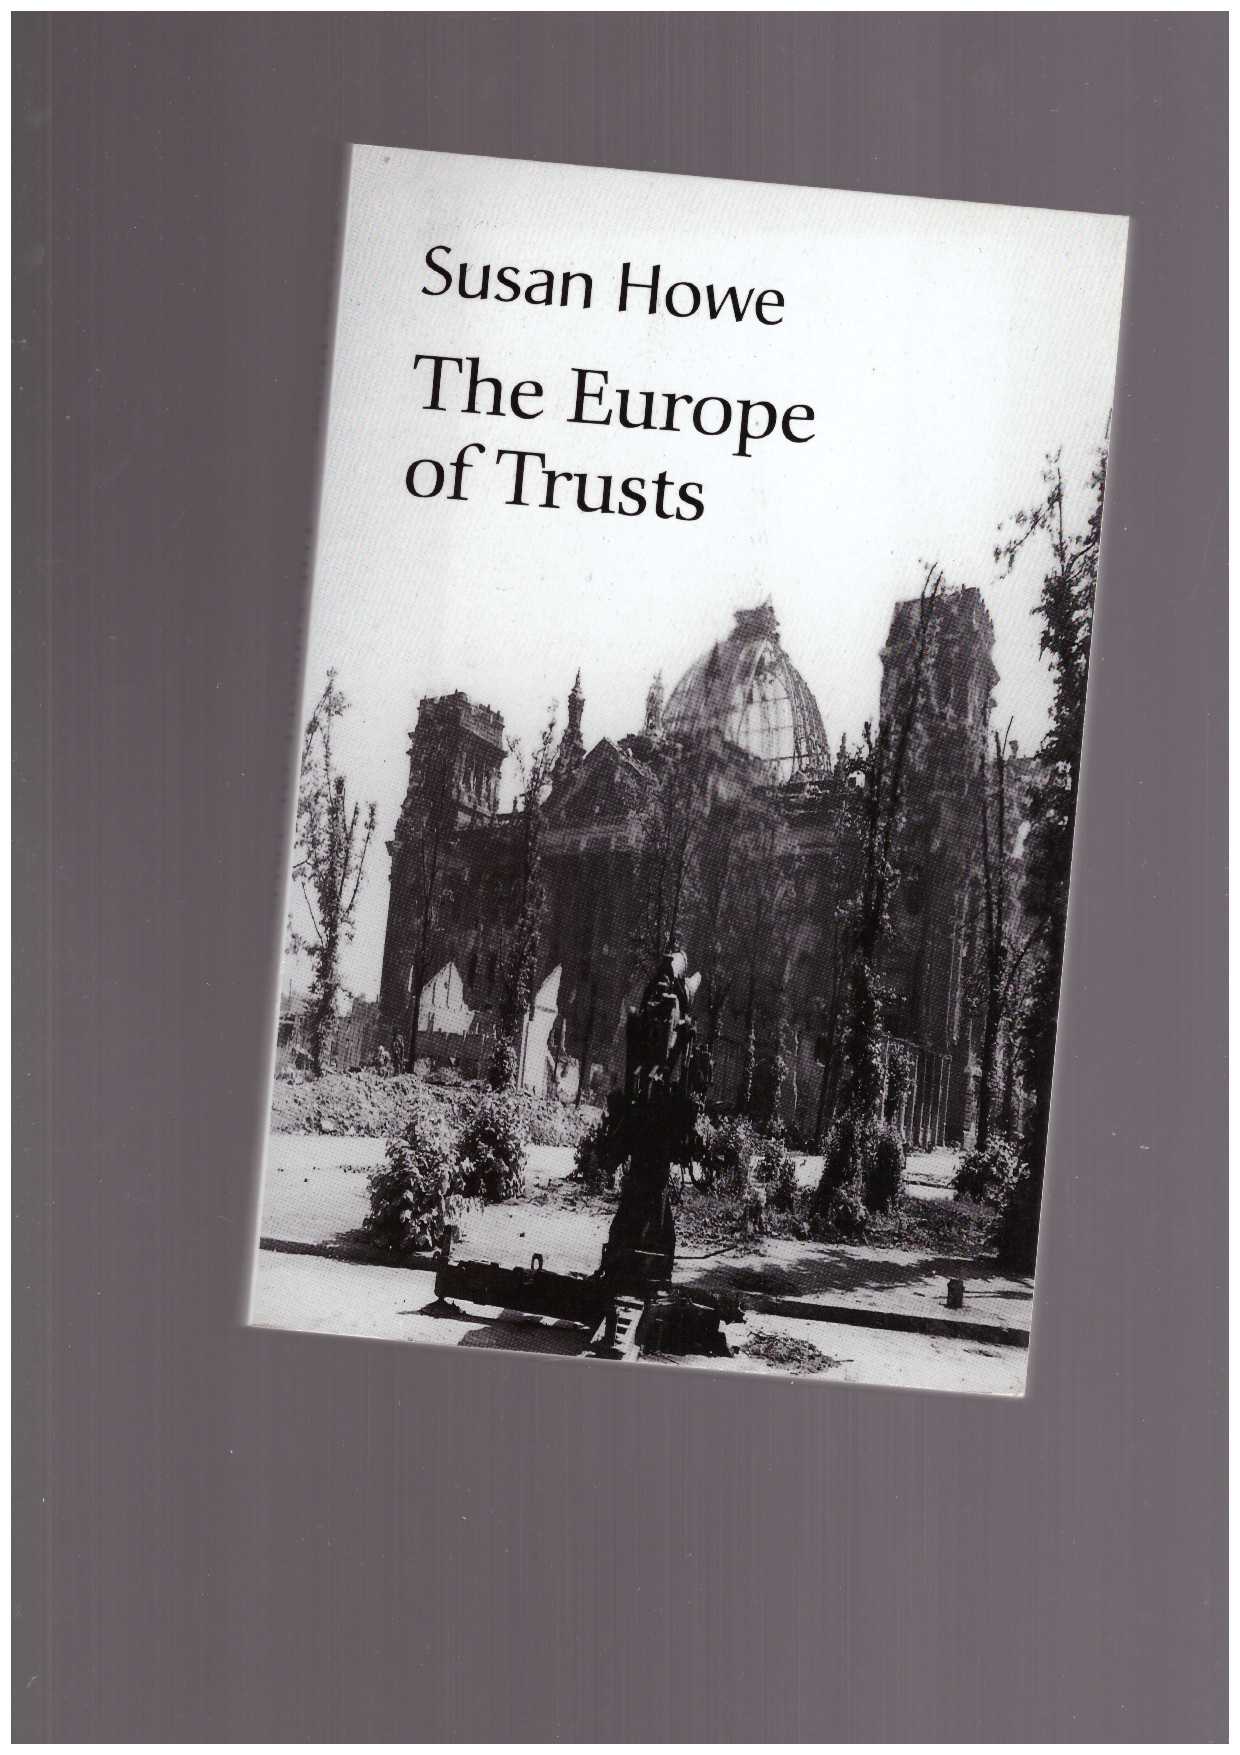 HOWE, Susan - The Europe of Trusts